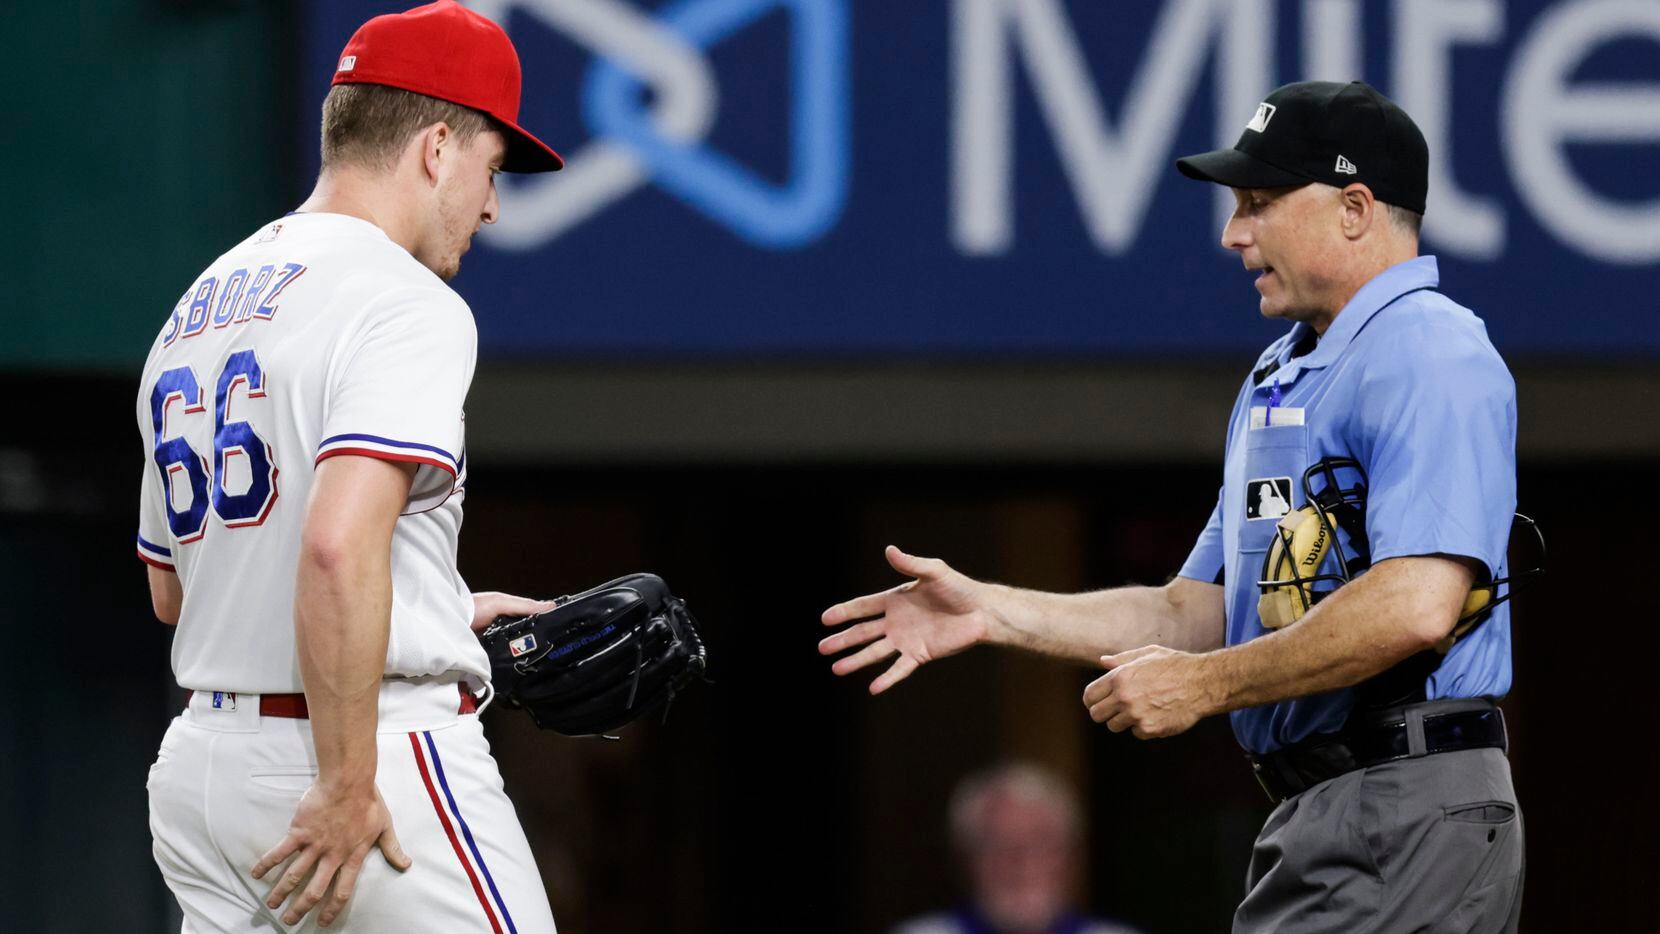 Home plate umpire Dan Iassogna inspects Texas Rangers relief pitcher Josh Sborz’s glove during the sixth inning of a baseball game against the Oakland Athletics in Arlington, Monday, June 21, 2021. (Brandon Wade/Special Contributor)